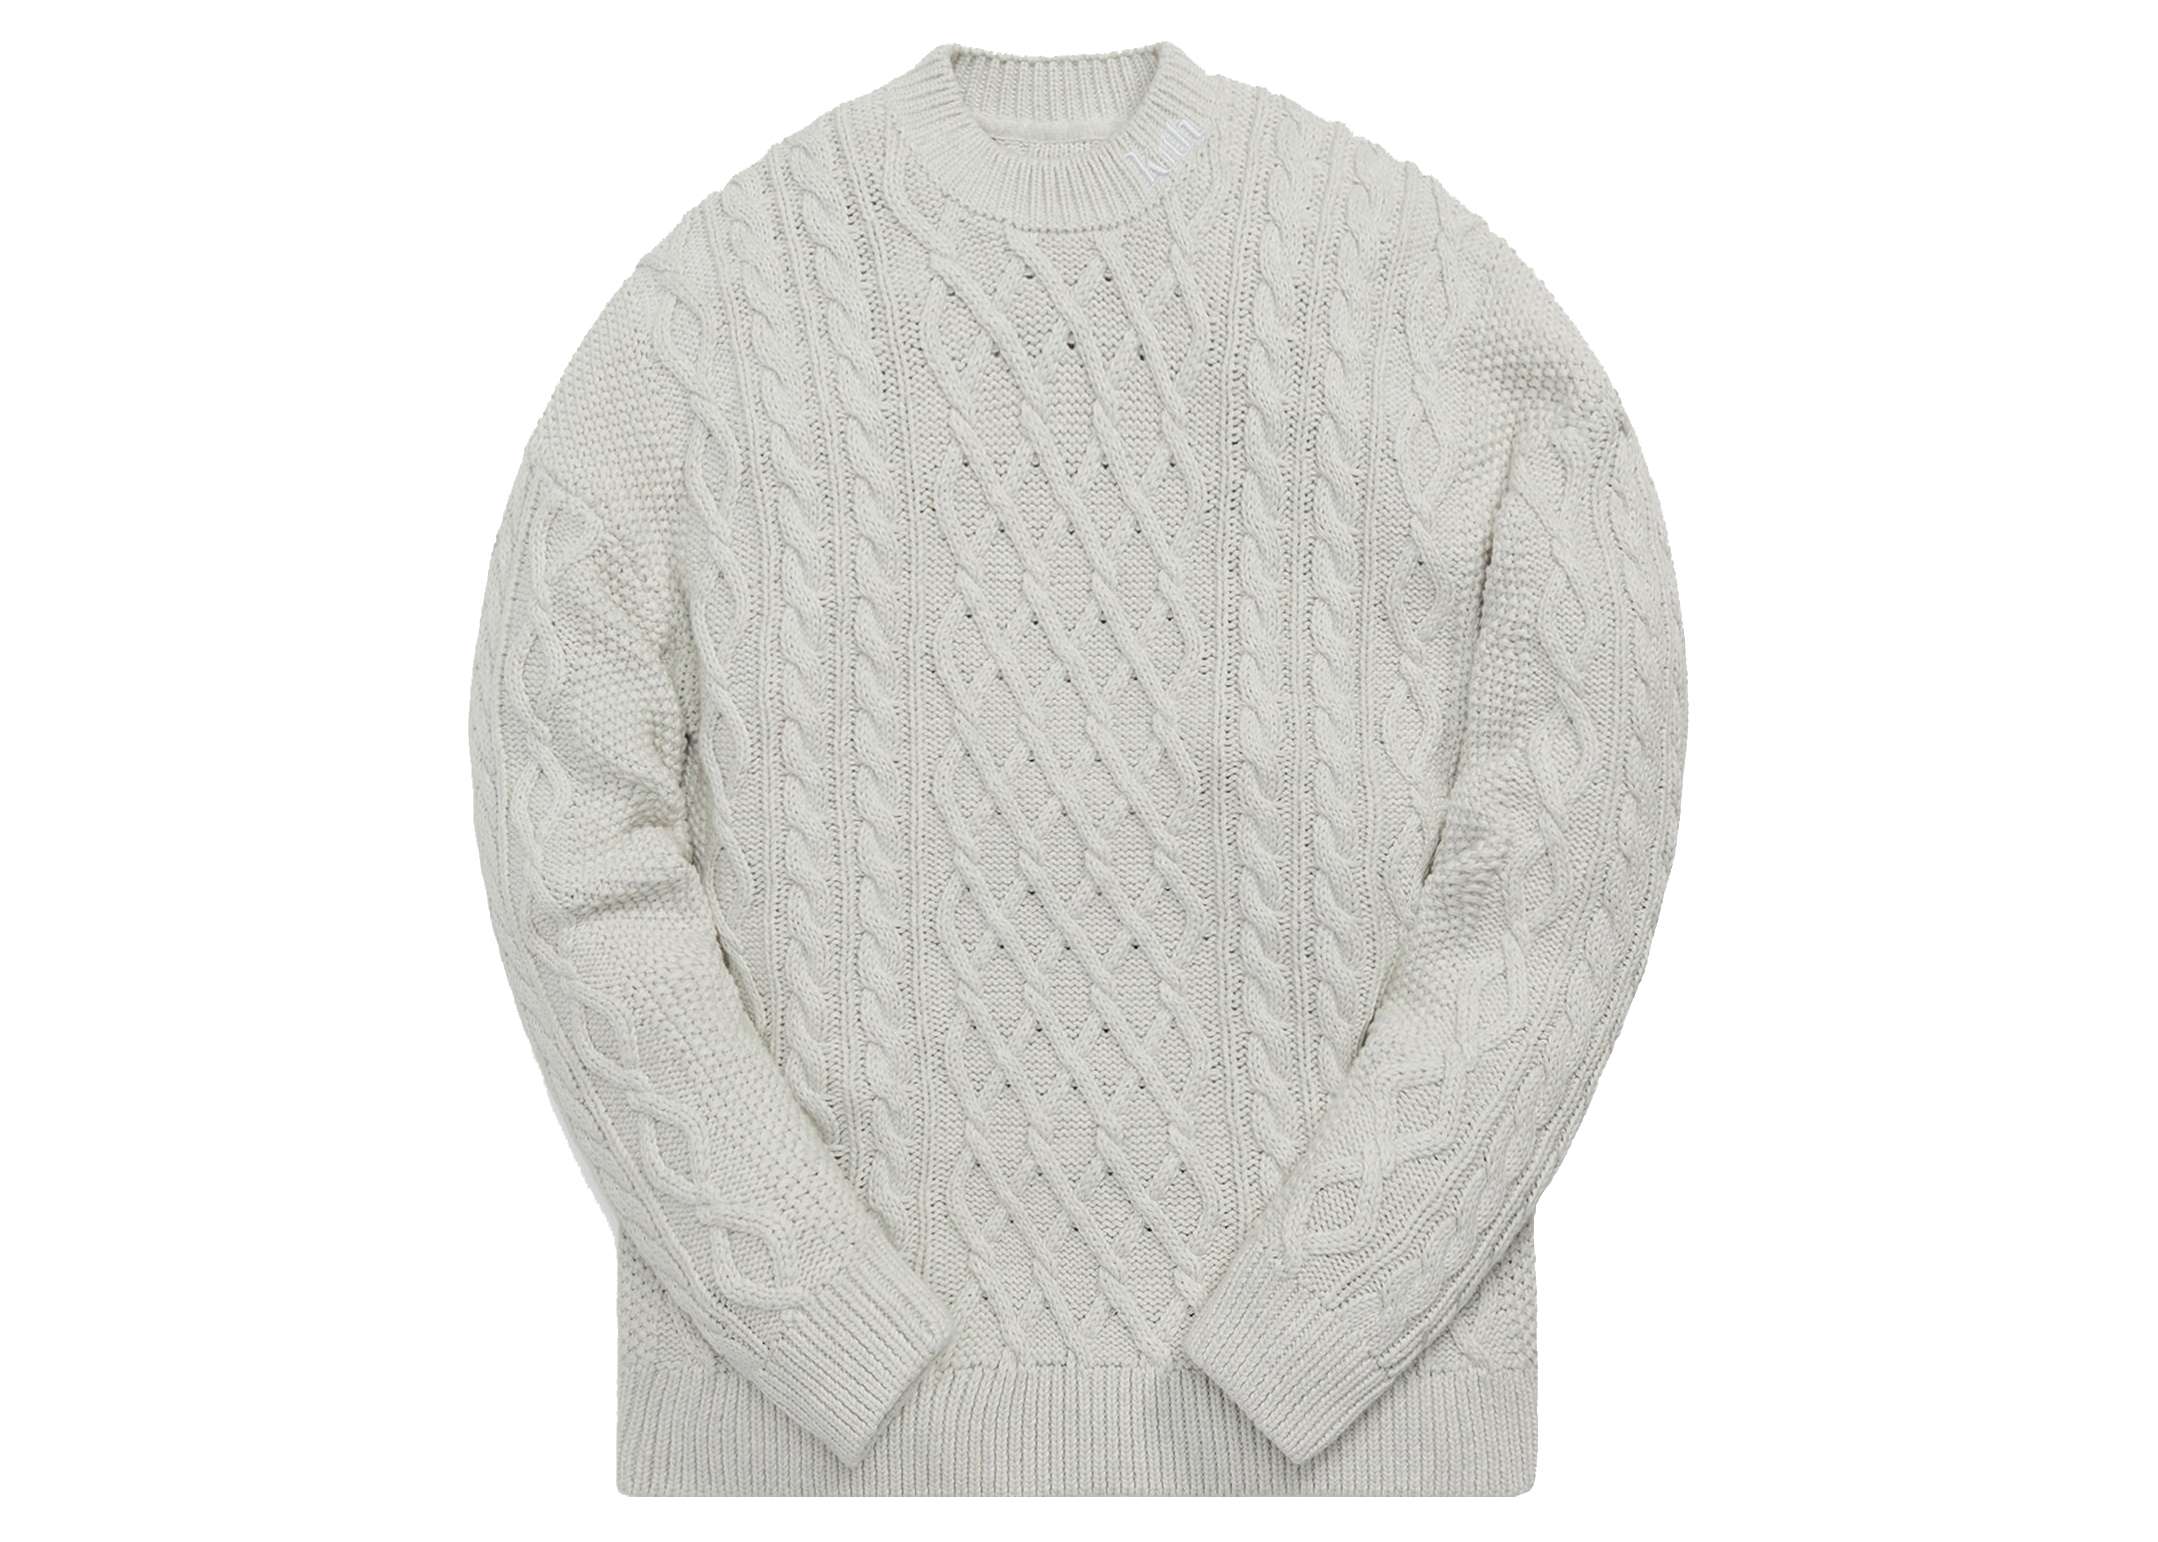 KITH GRAMERCY CABLE MOCK NECK